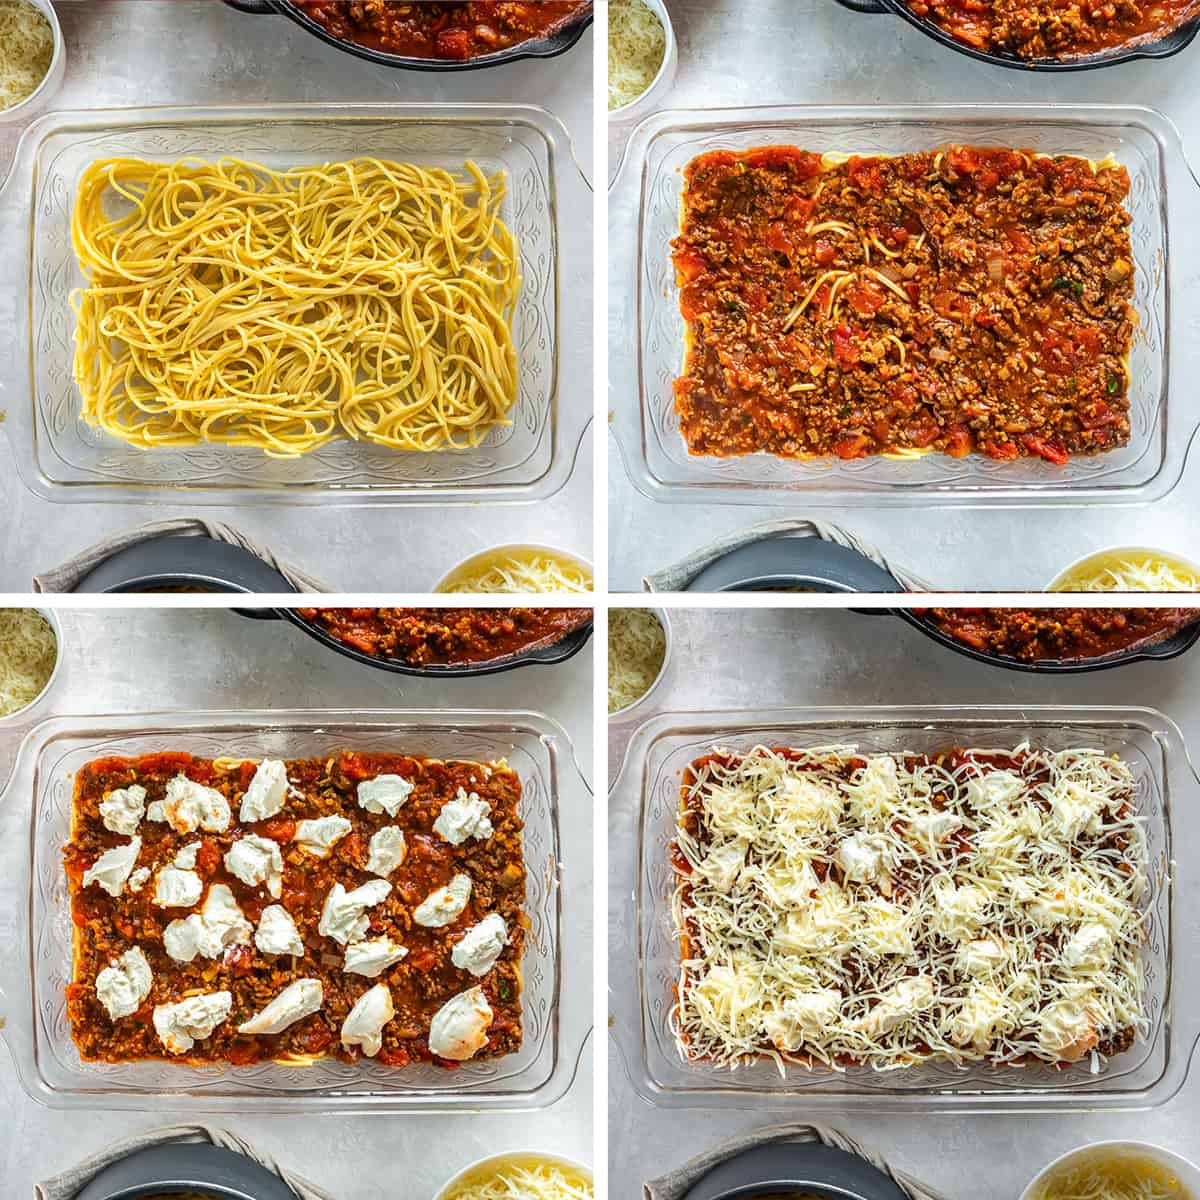 Four images showing spaghetti with sauce and cheese in a casserole dish.